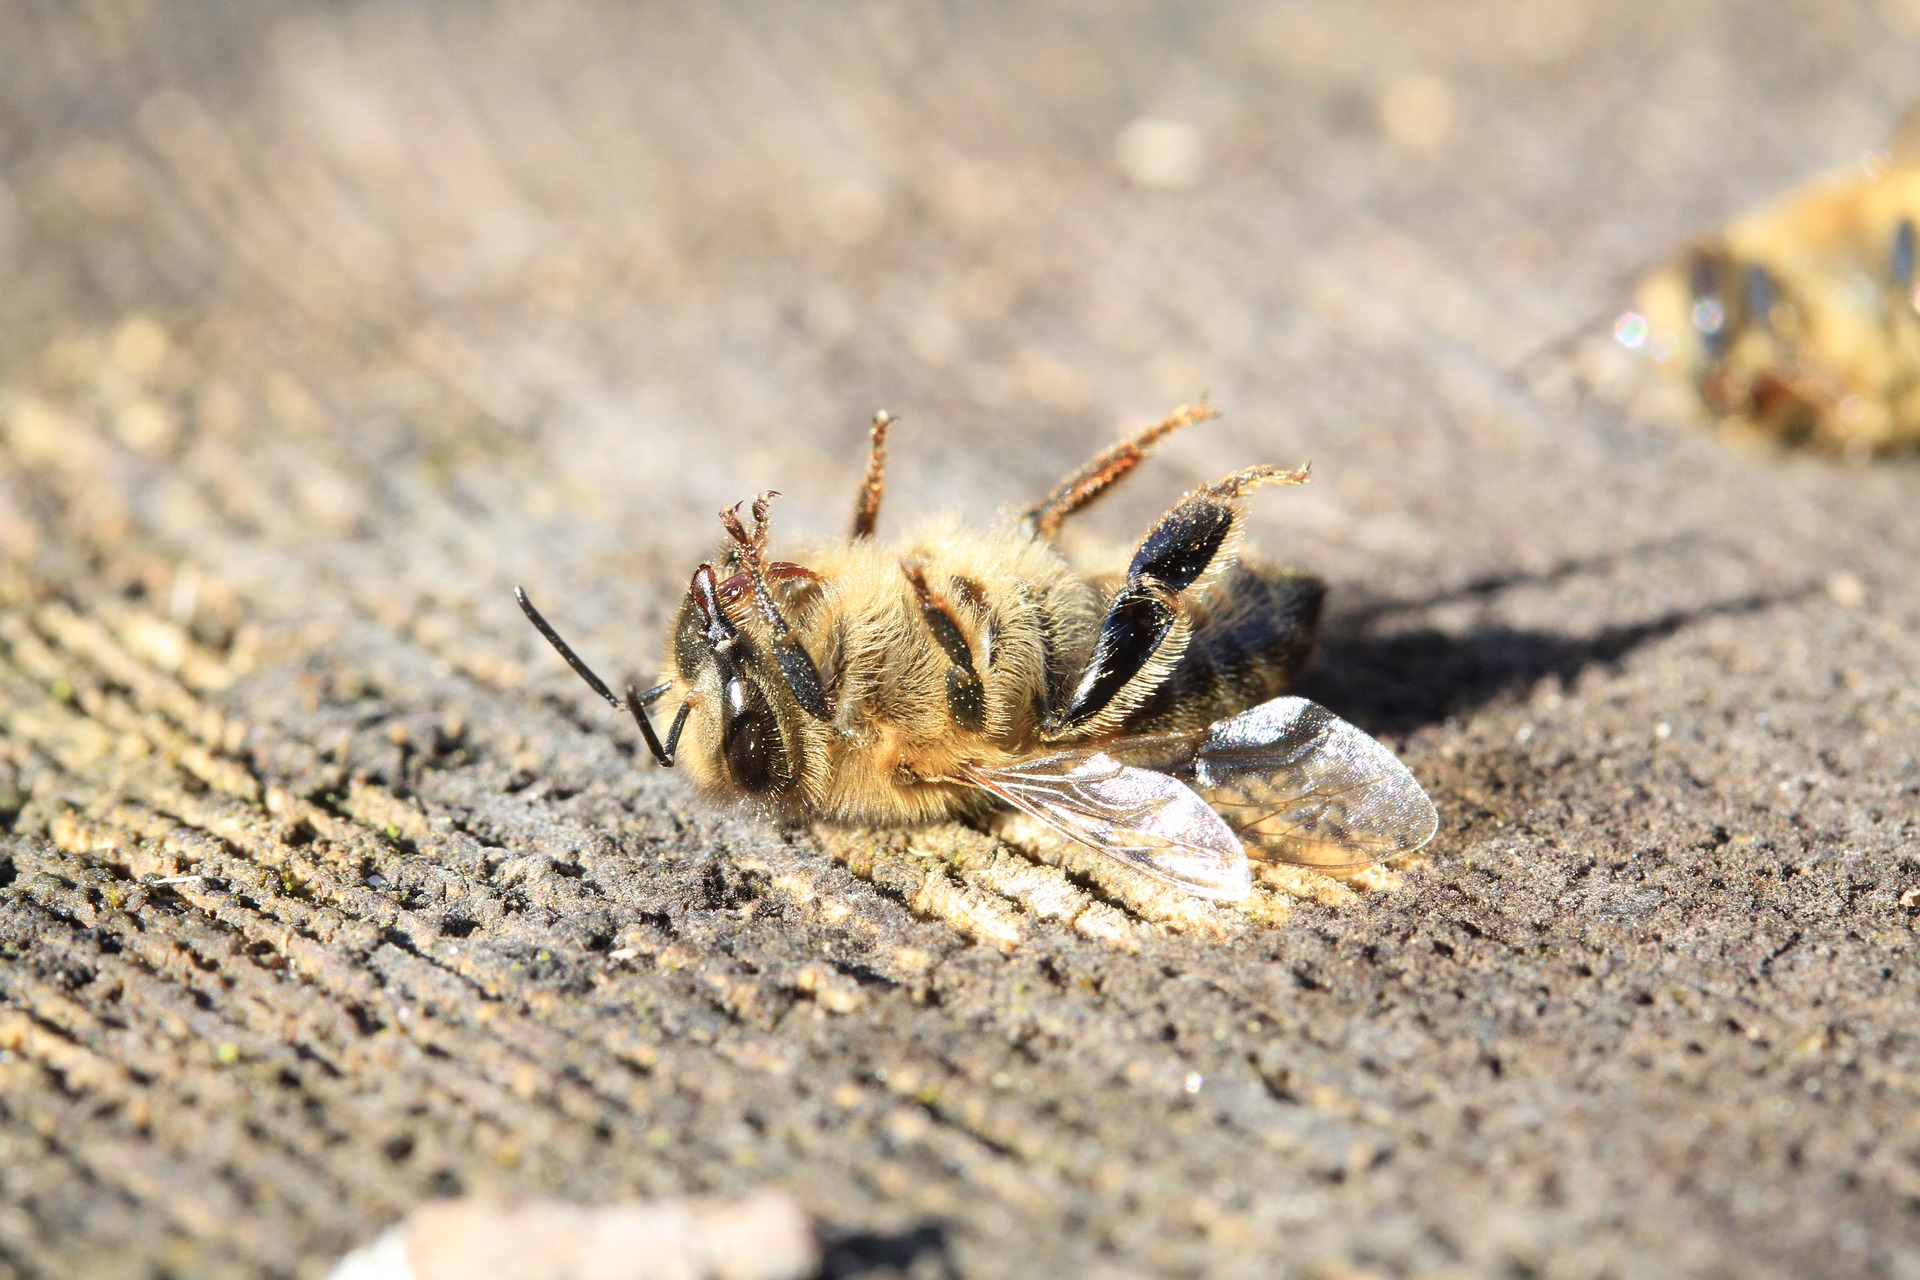 Why are bees dying? Pollinators need your help before it’s too late